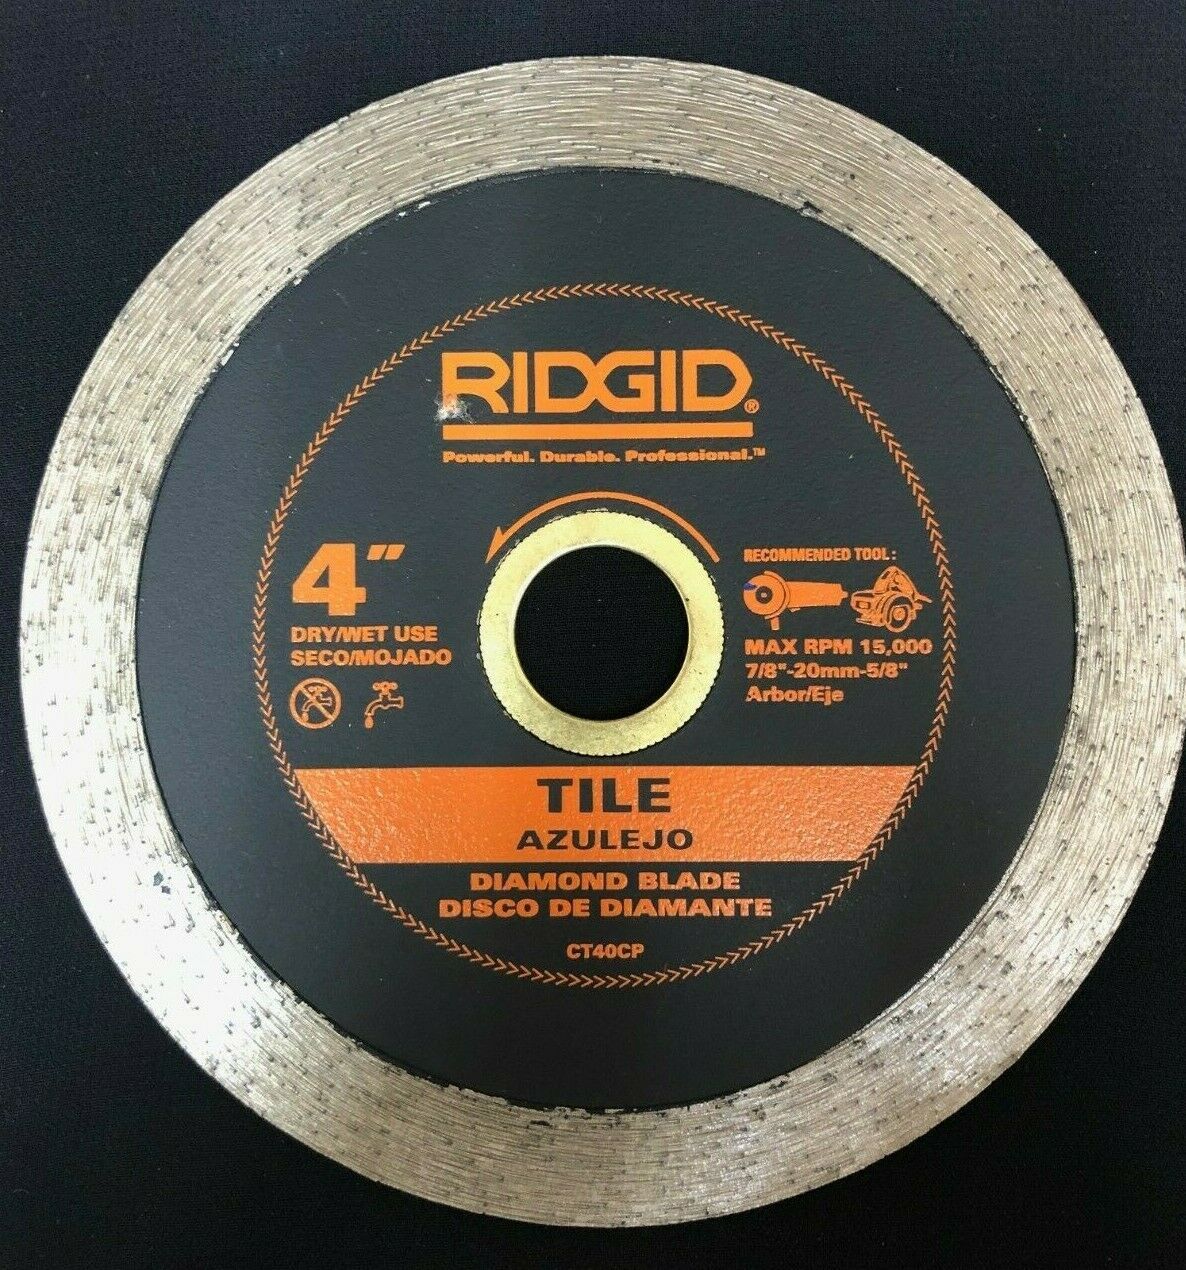 Primary image for Ridgid 4 in. Continuous Tile Diamond Blade CT40CP